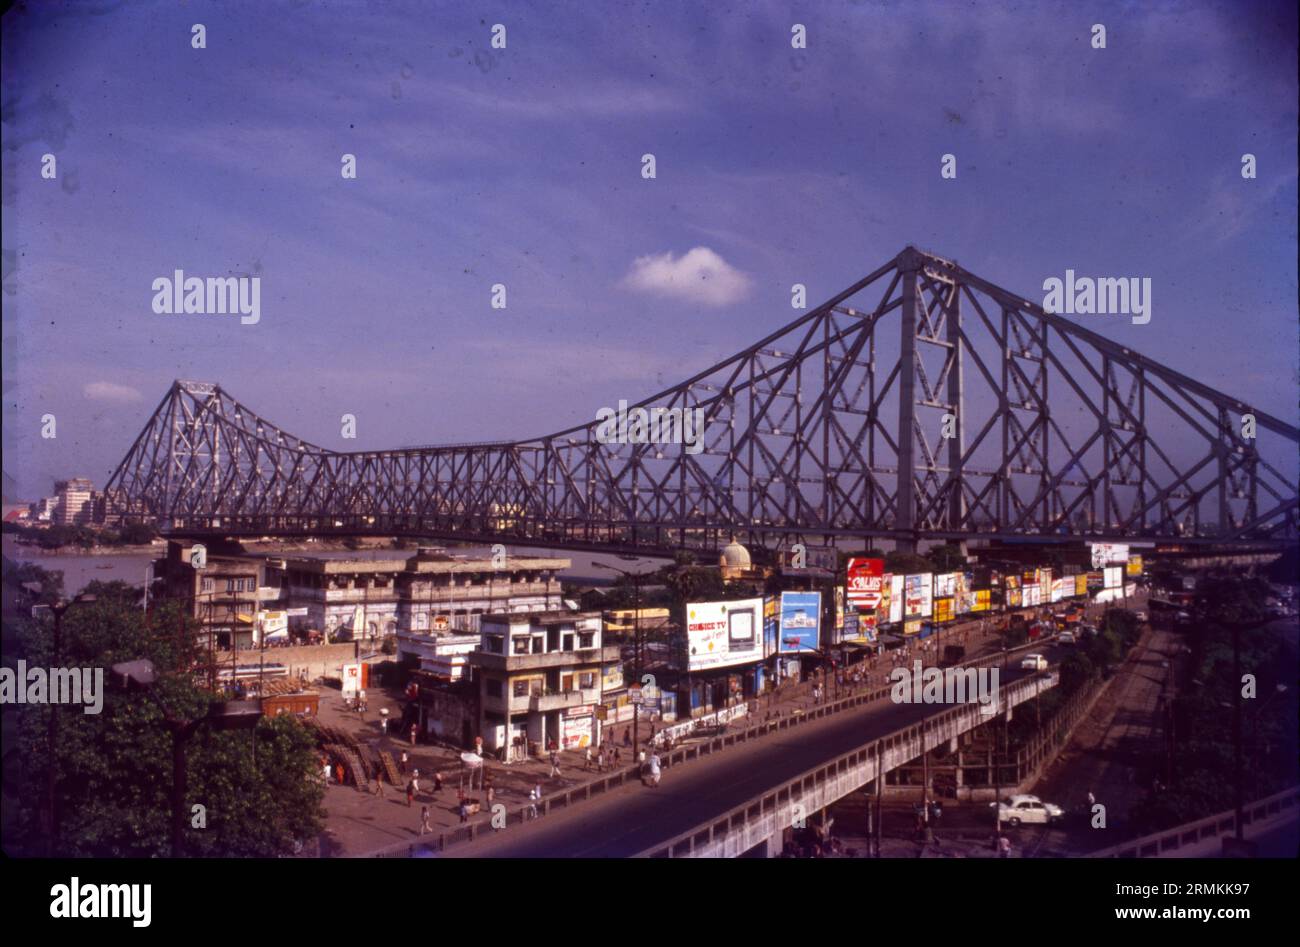 The Howrah Bridge is a balanced cantilever bridge over the Hooghly River in West Bengal, India. Commissioned in 1943, An iconic landmark in Kolkata, the Howrah Bridge is a huge steel bridge over the Hooghly River. It is considered to be one of the longest cantilever bridges in the world. Also known as Rabindra Setu, it connects Howrah and Kolkata. It carries 100,000 vehicles and countless pedestrians daily. Stock Photo